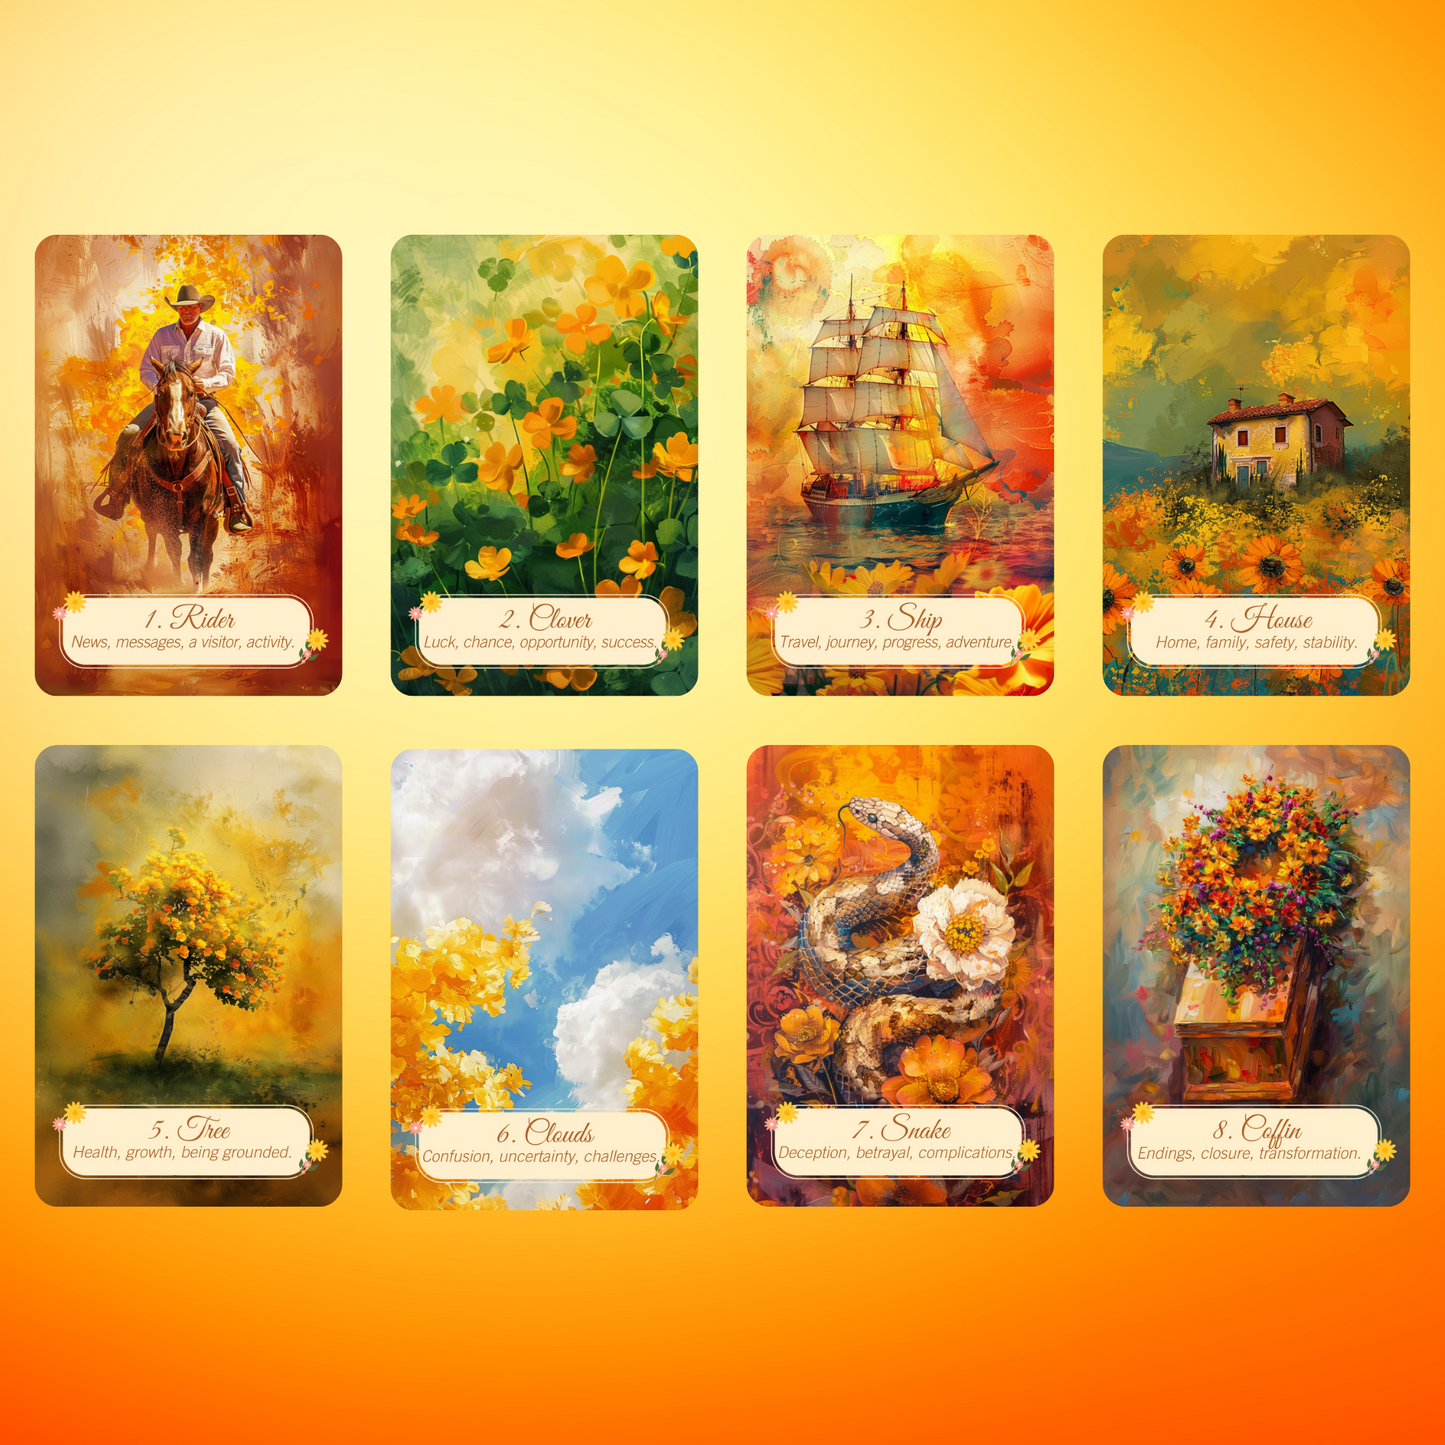 NEW!! Summer Meadows Tarot and Lenormand Bundle by Hattie Thorn. 2 Deck Special!